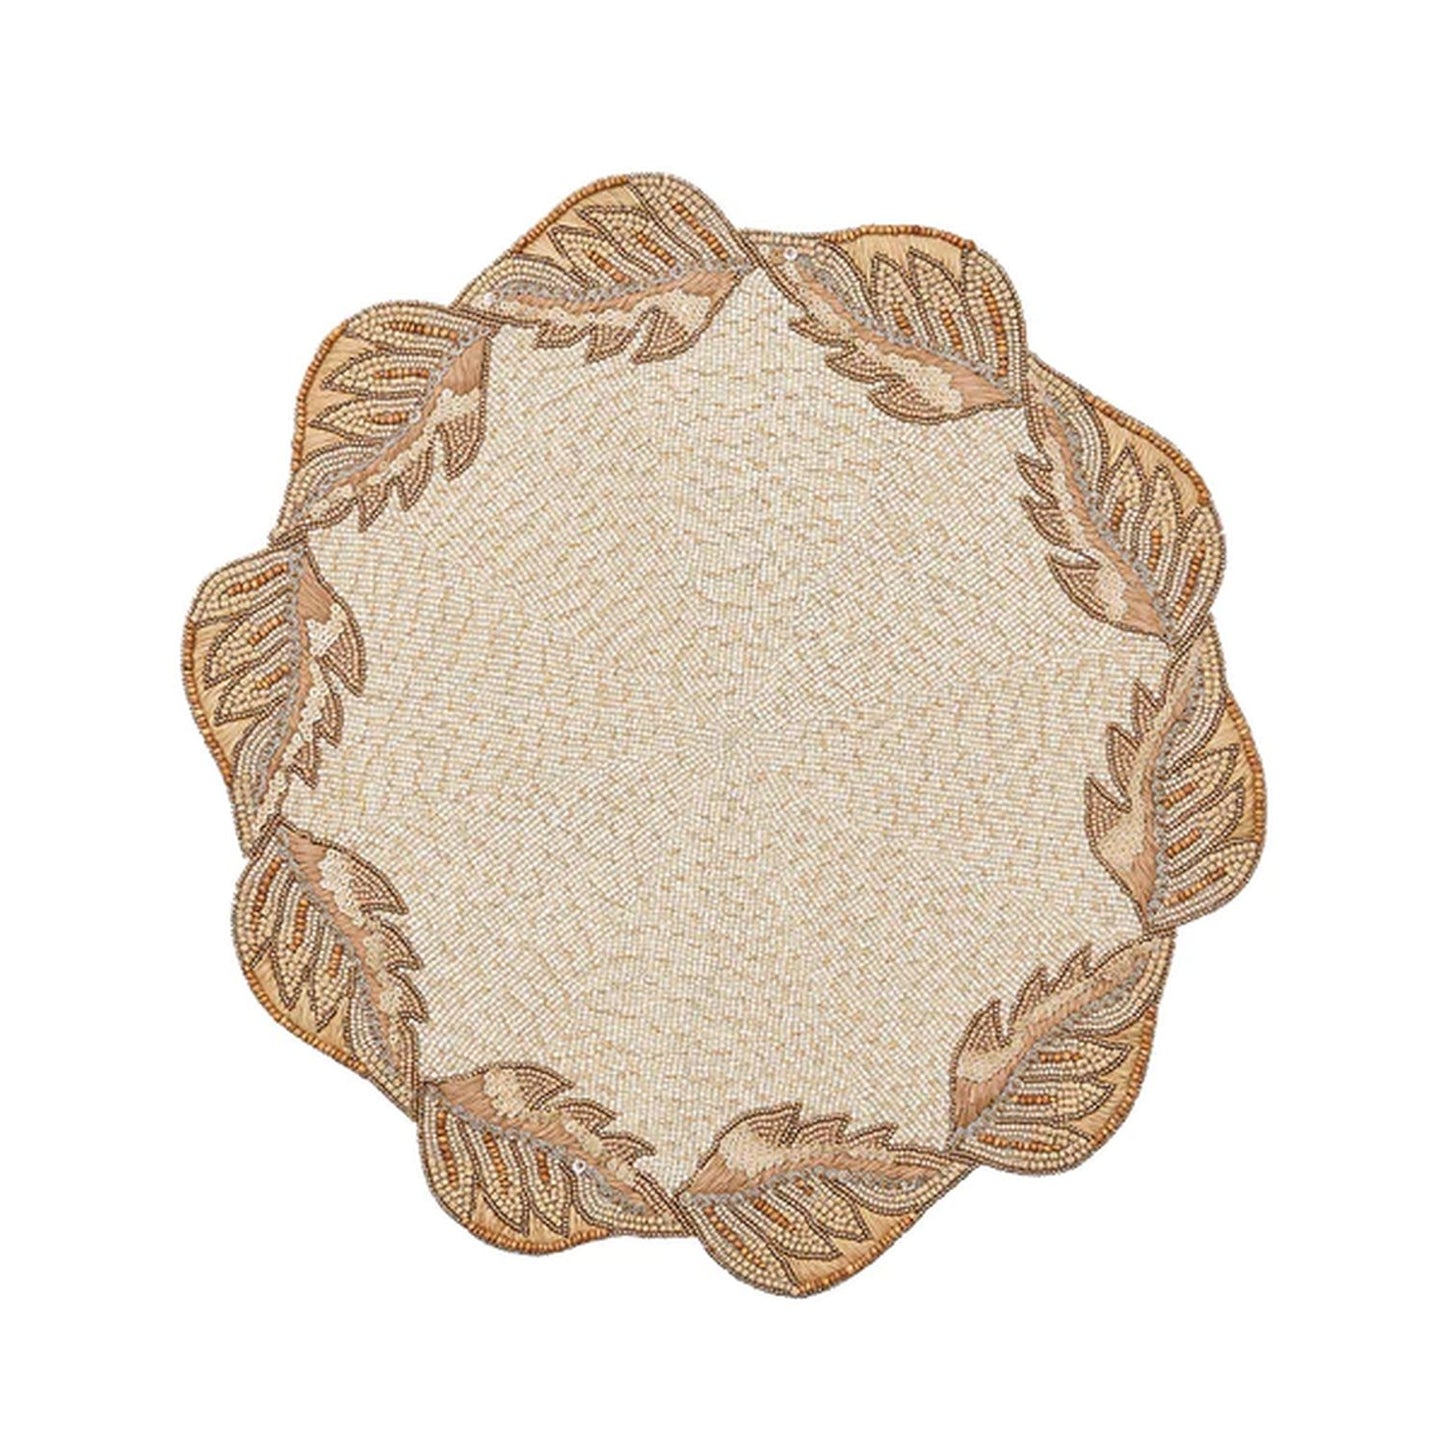 Kim Seybert Winding Vines Placemat in Ivory, Natural & Gold, Set of 2